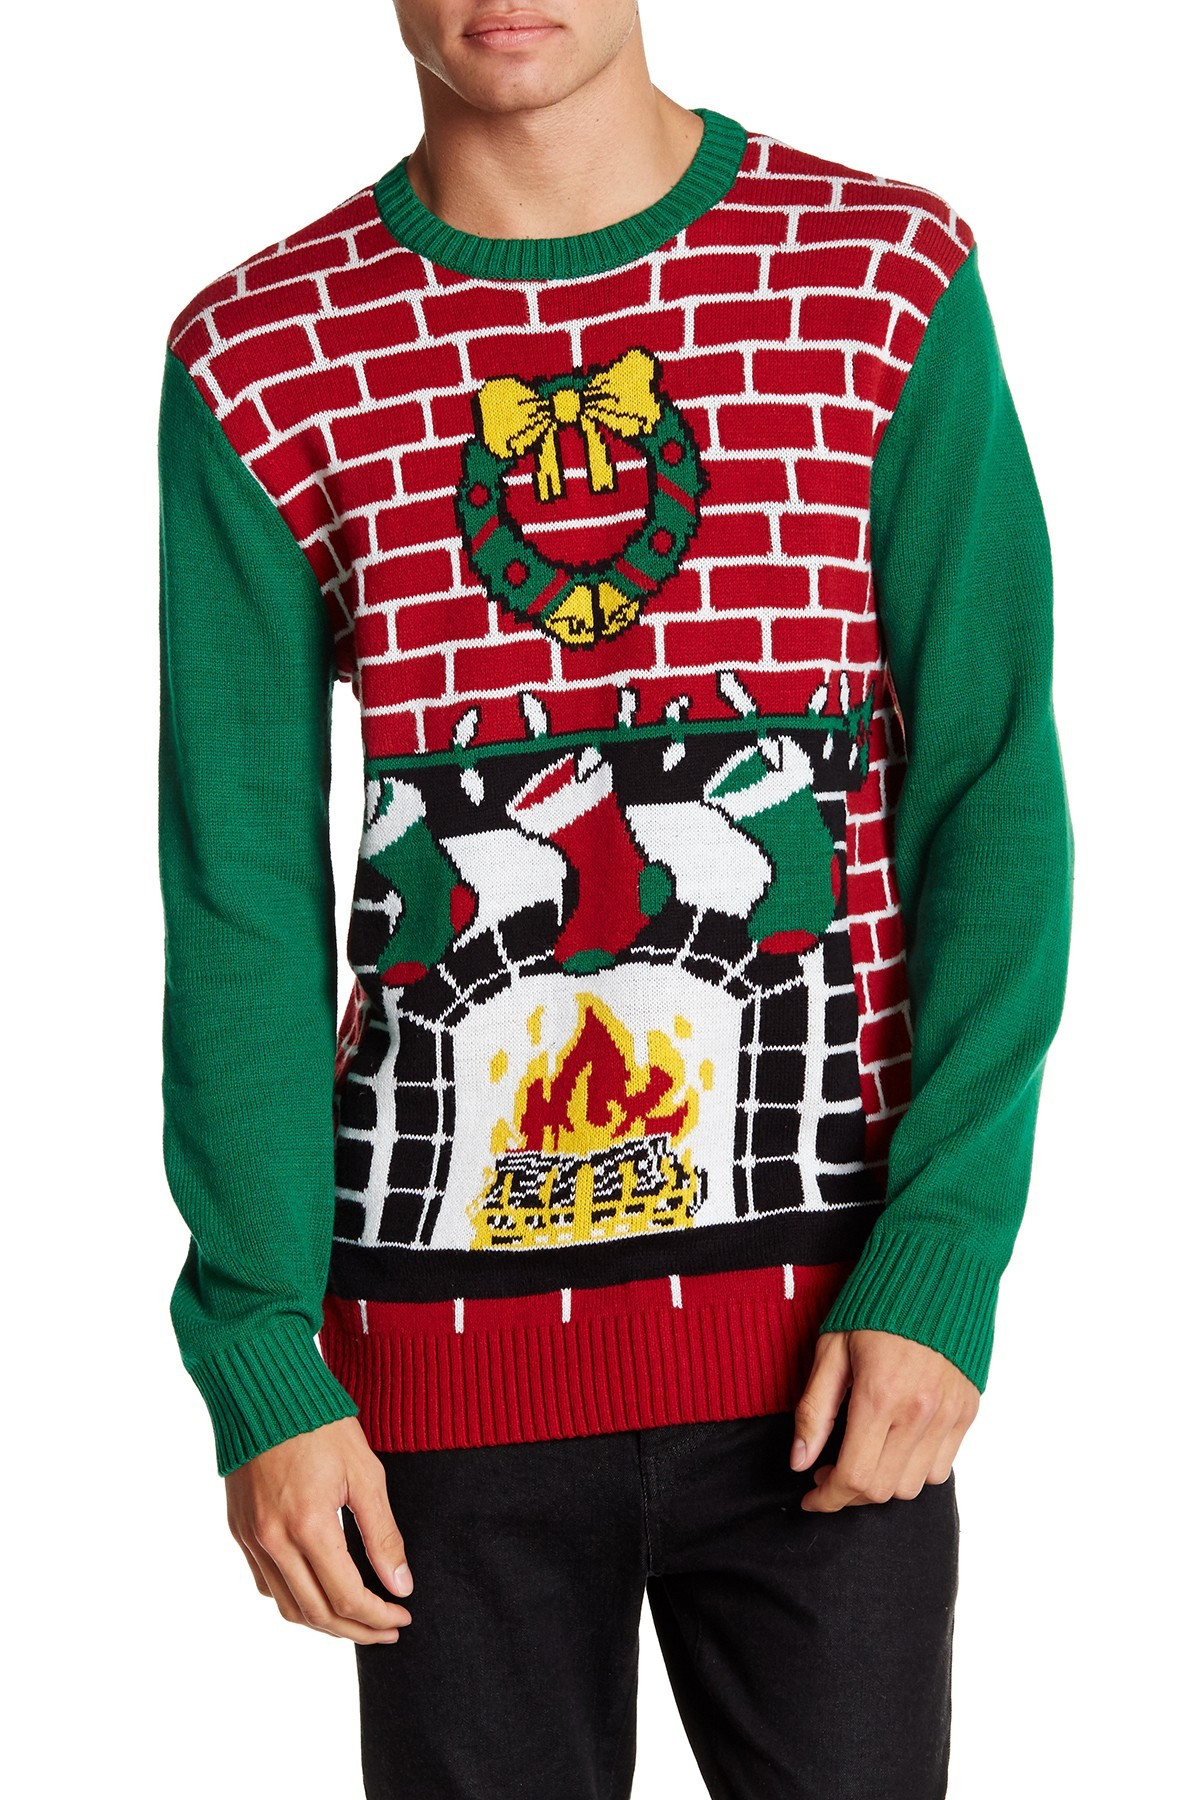 Ugly Christmas Sweater With Fireplace
 Ugly Christmas Sweater